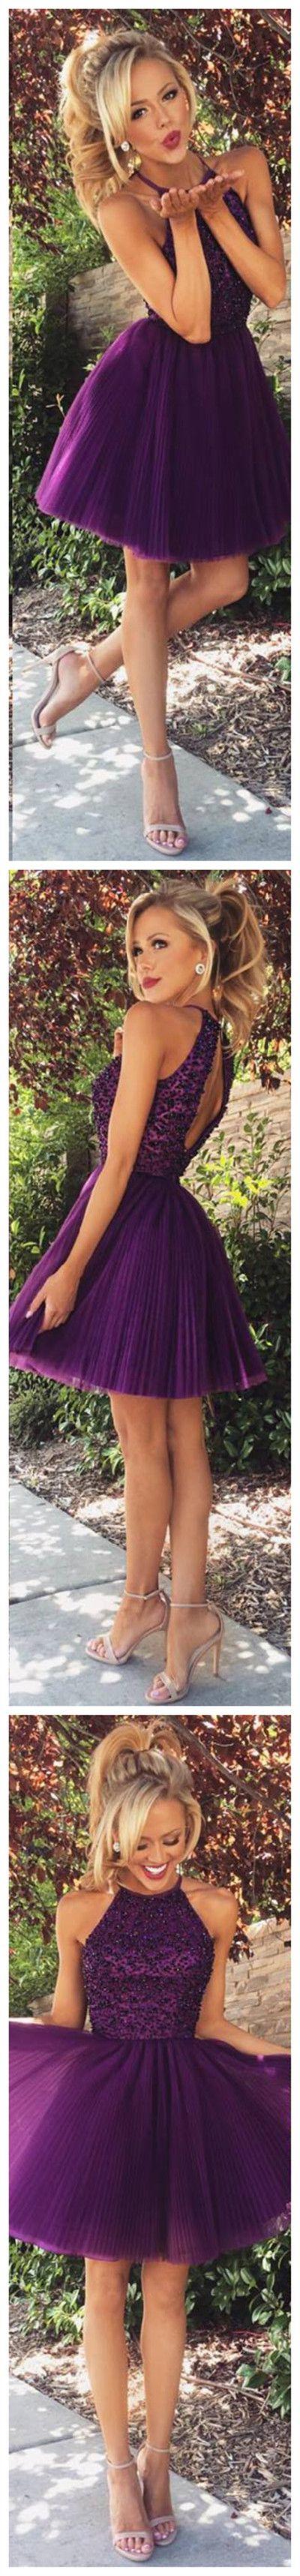 Mariage - A-line High Neck Black Beaded Bodice Grape Tulle Short Prom Homecoming Dresses APD1557 From DiyDressonline